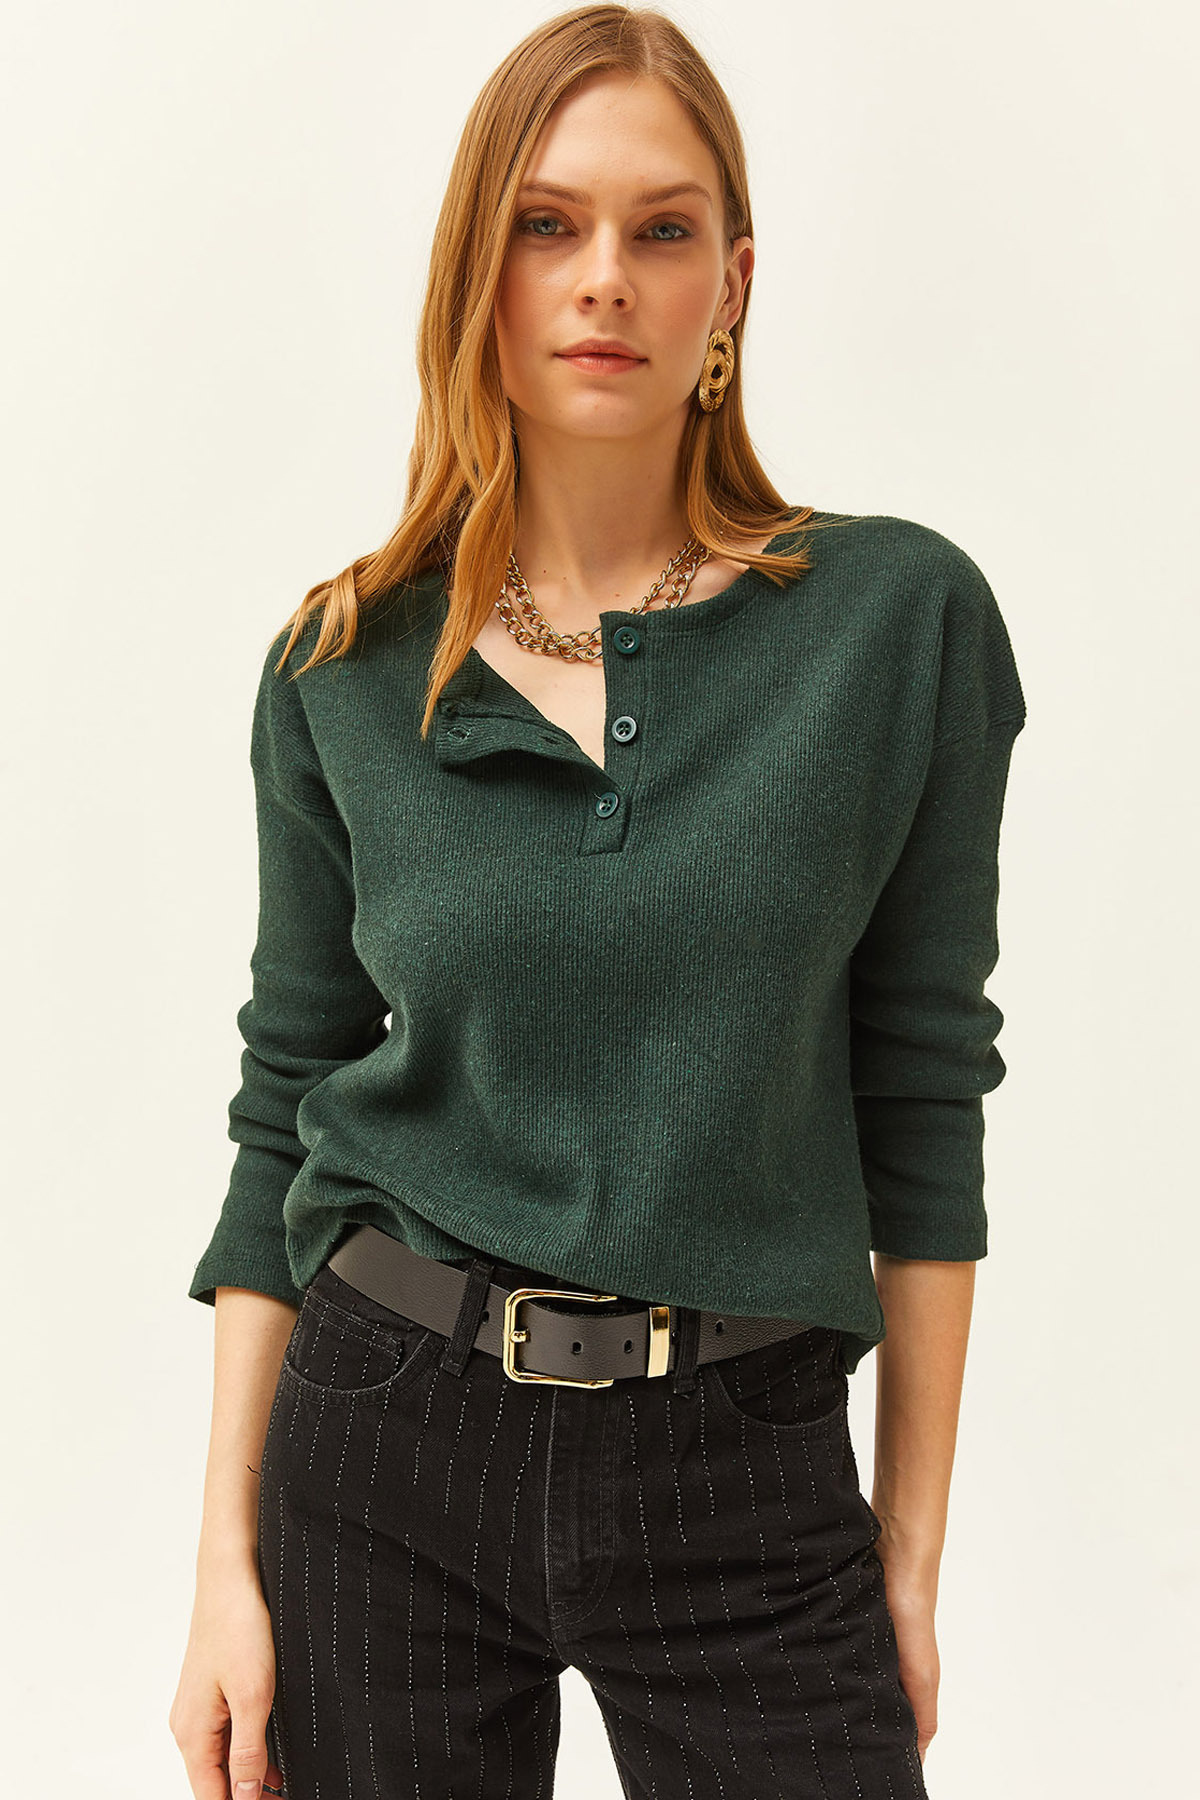 Olalook Women's Emerald Green Buttoned Loose Sweater